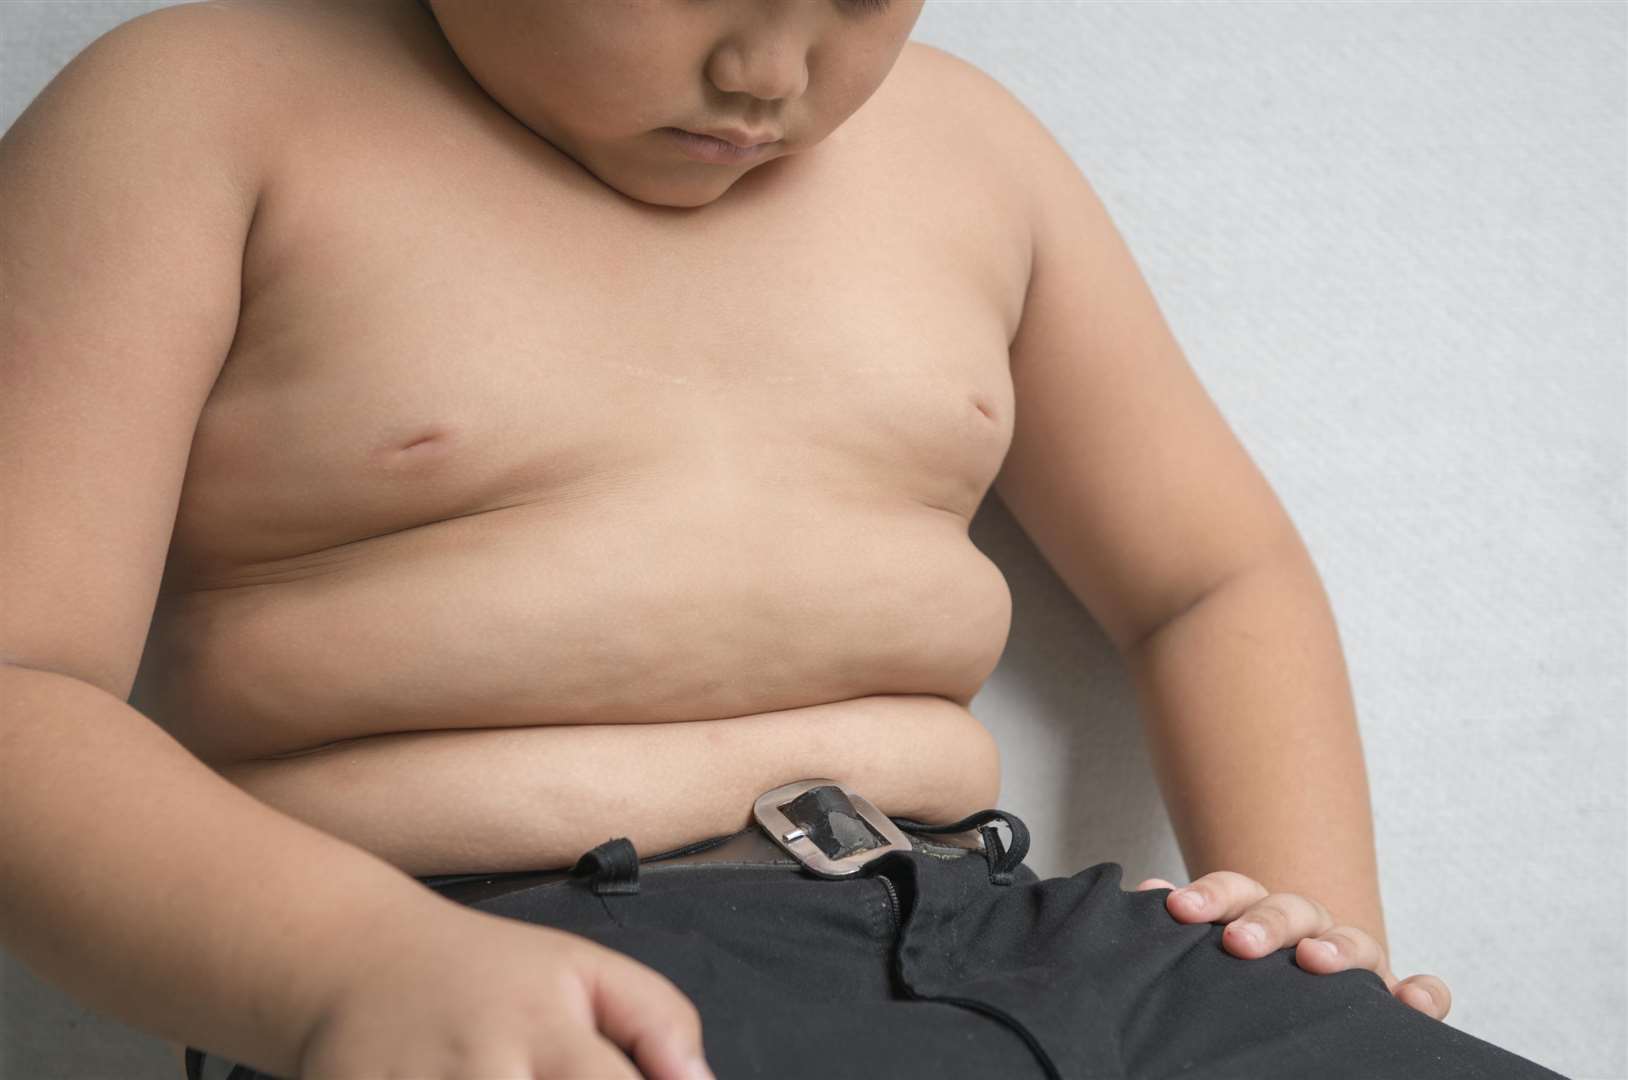 More than half of primary school children in Kent are either overweight or obese